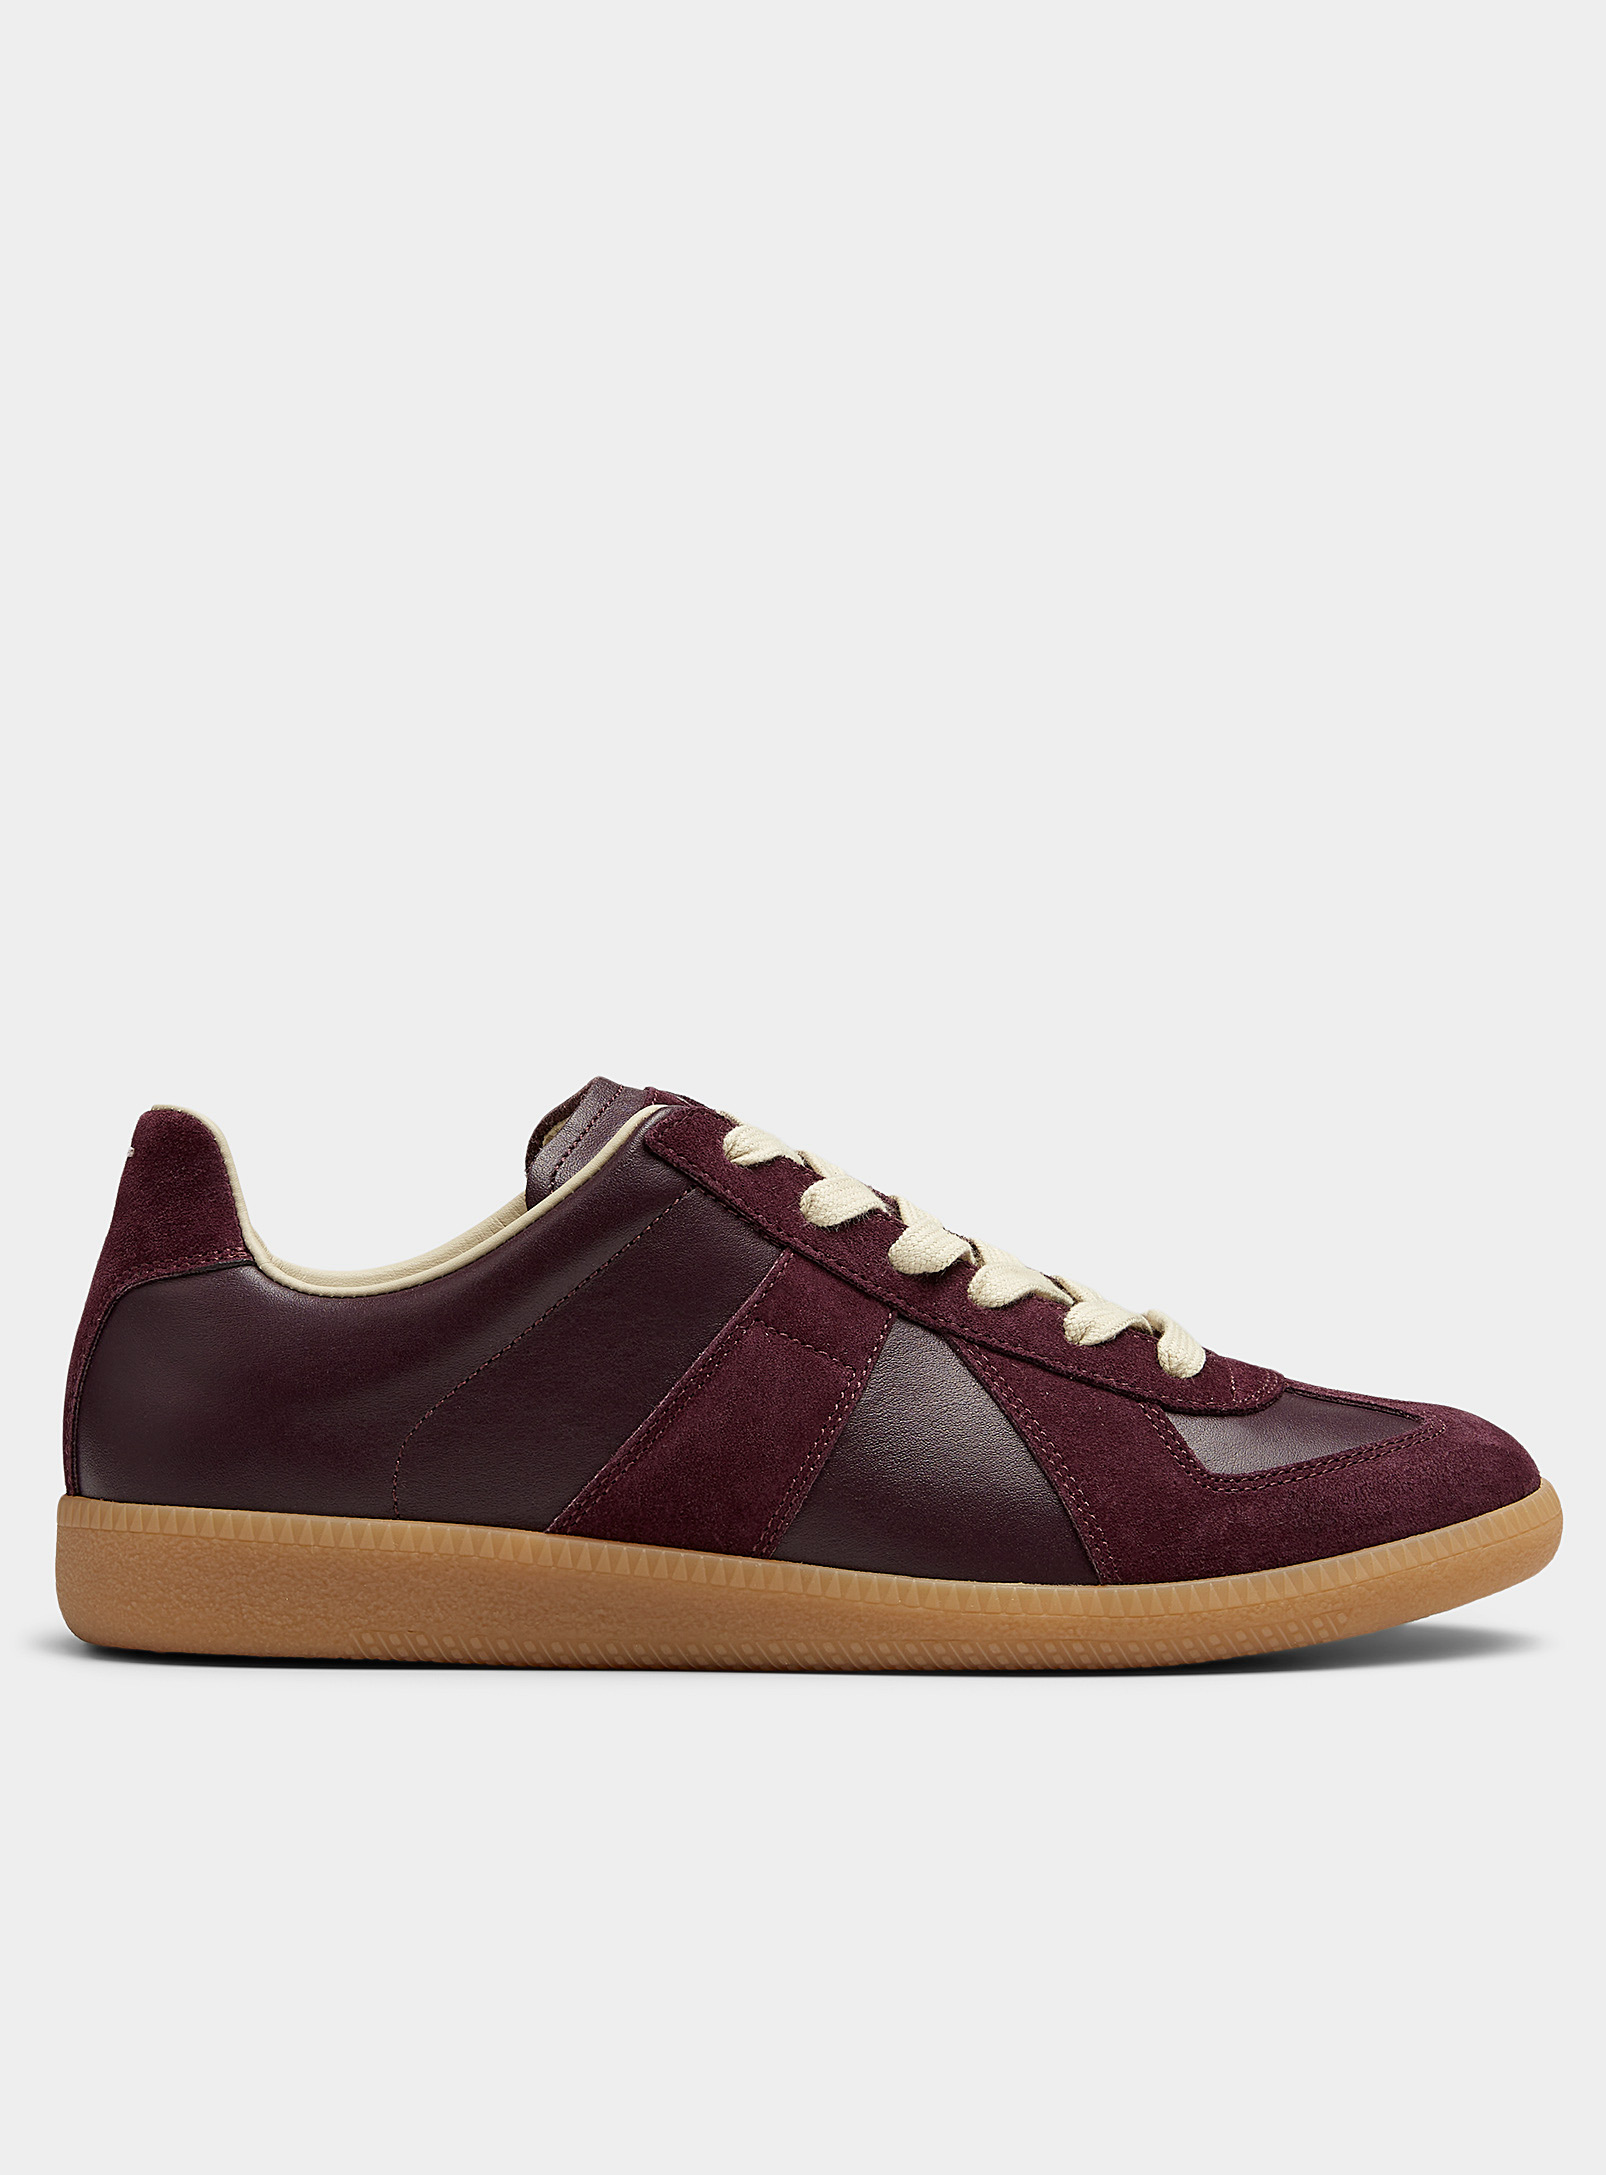 Maison Margiela Replica Leather And Suede Trainers In Burgundy